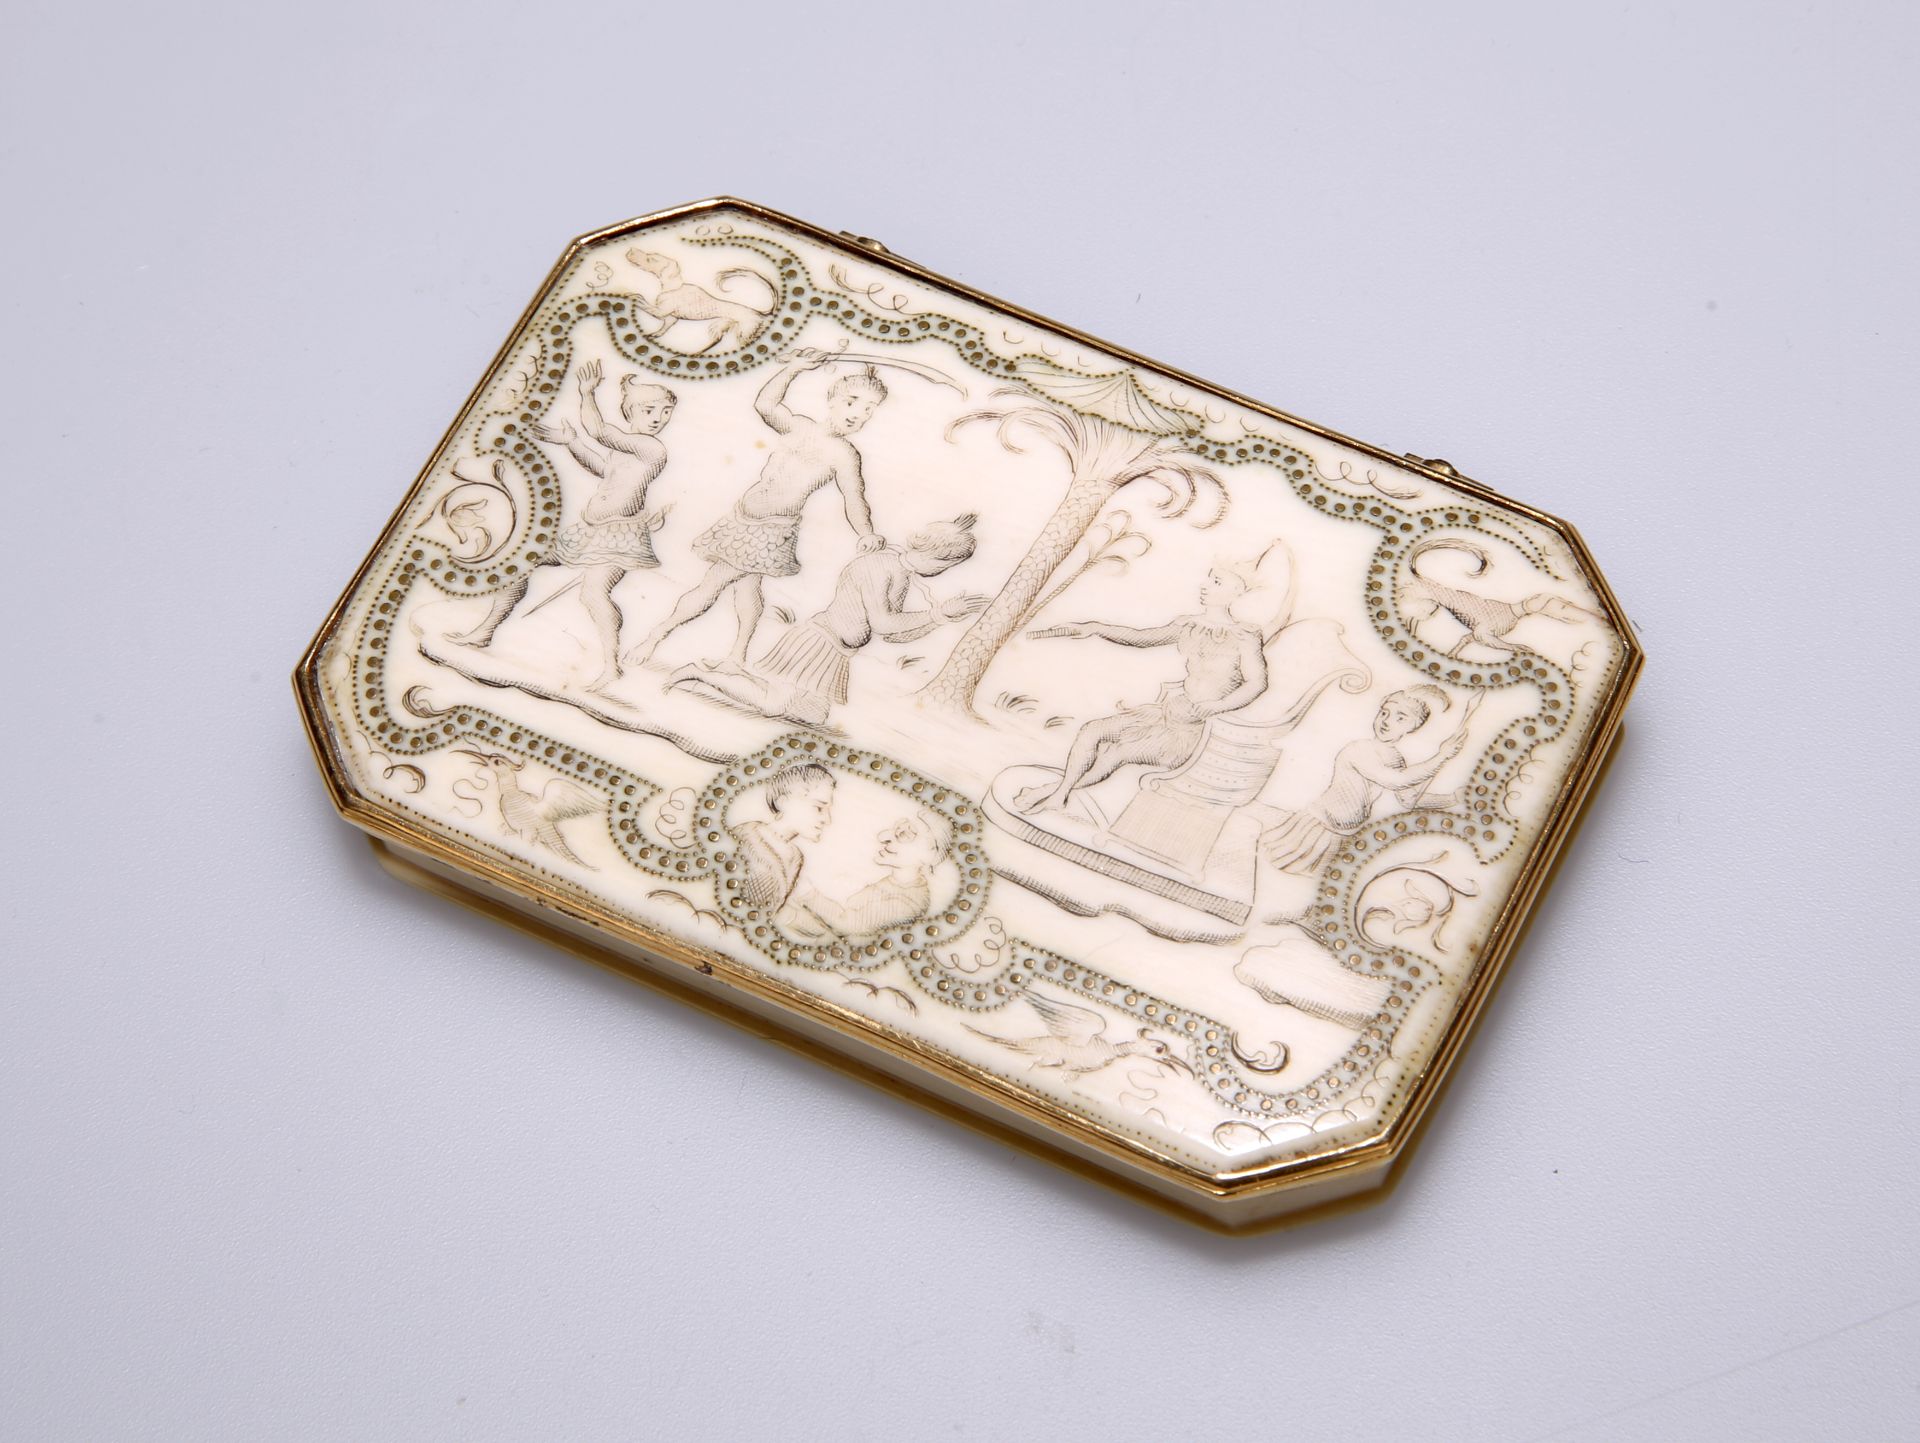 A GOLD-MOUNTED IVORY SNUFF-BOX, APPARENTLY UNMARKED, FIRST HALF 18TH CENTURY